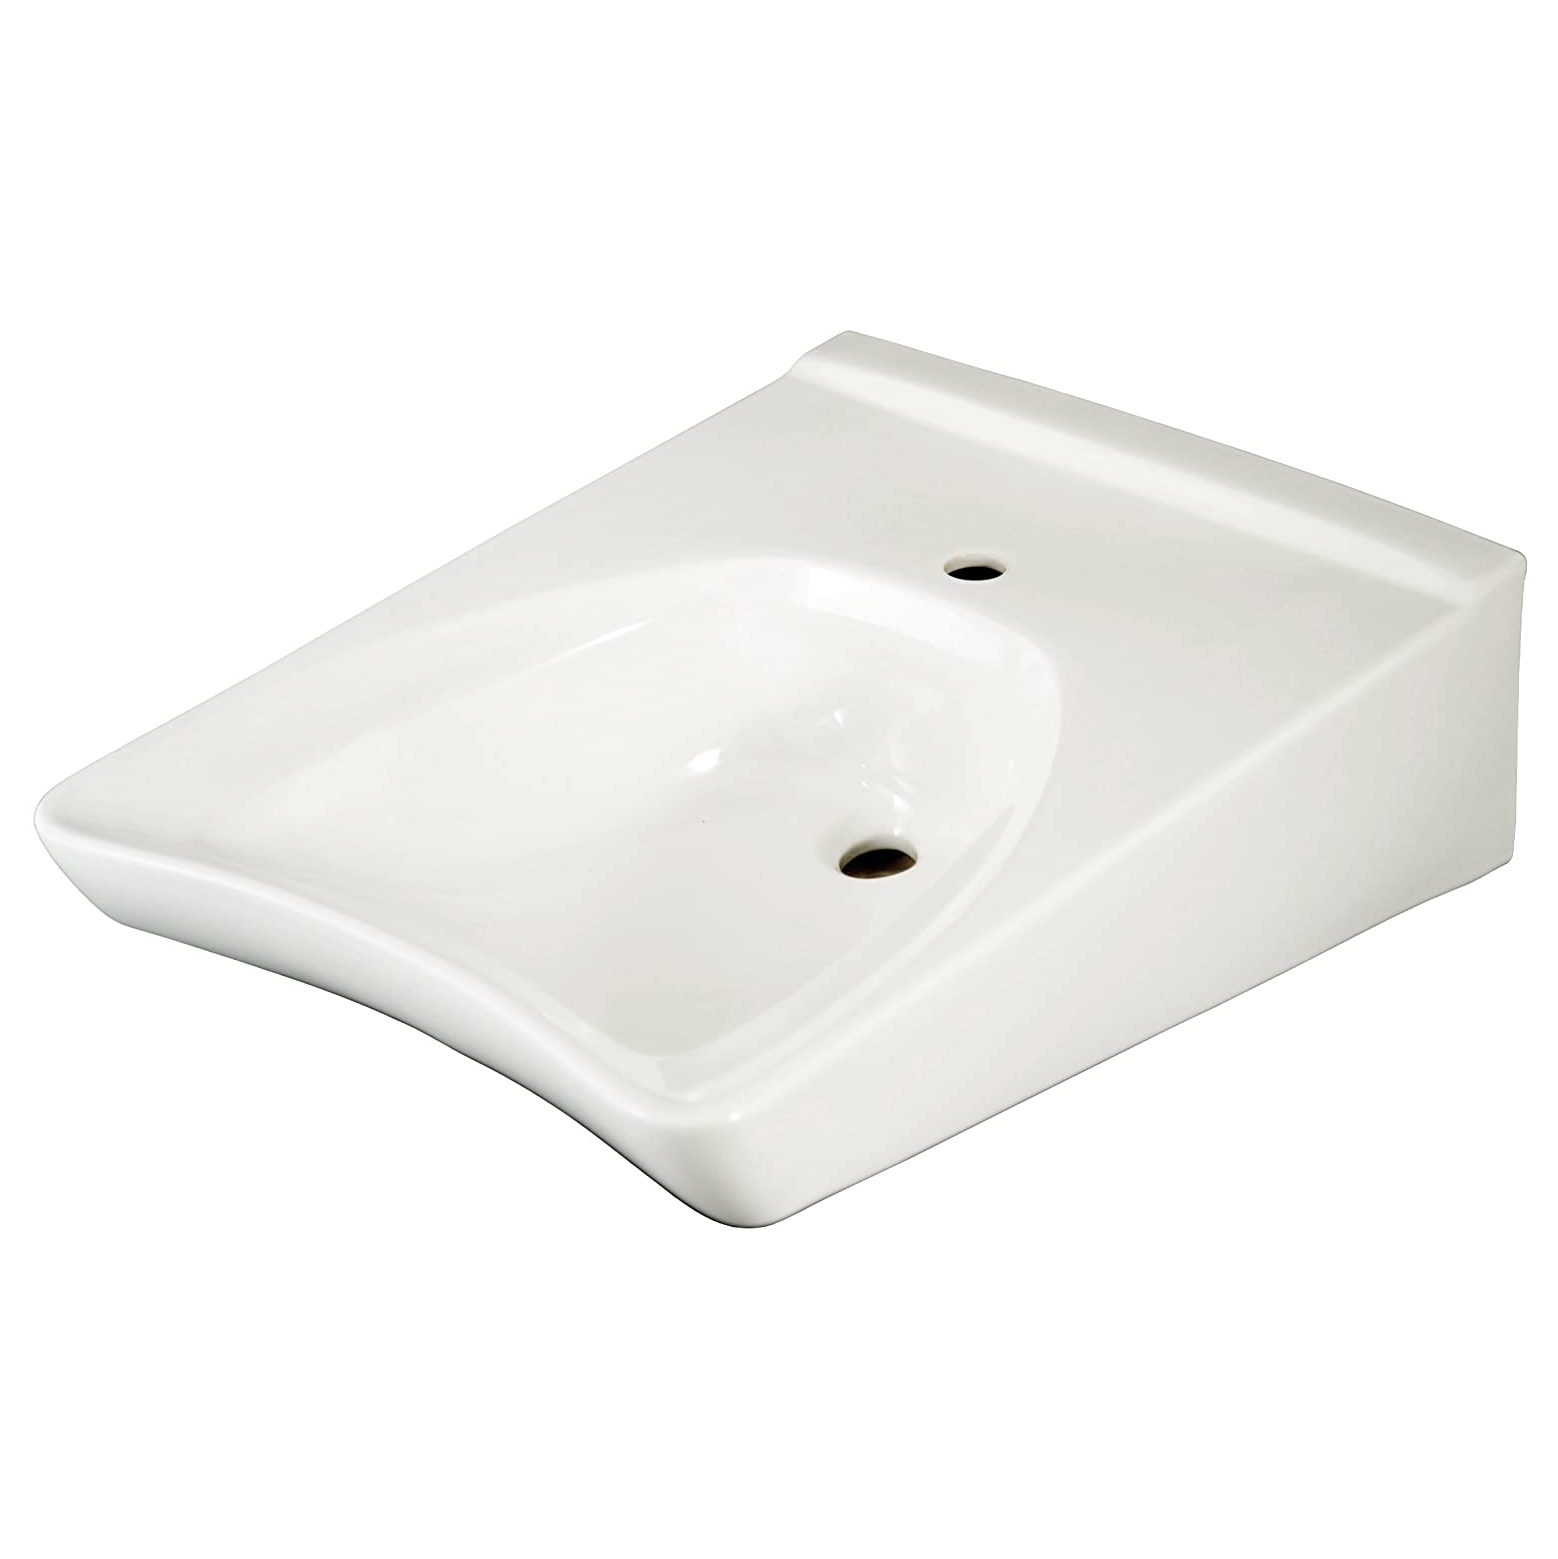 Wall 20-1/2x27" Lav Sink w/1 Faucet & Soap Hole in Cotton White